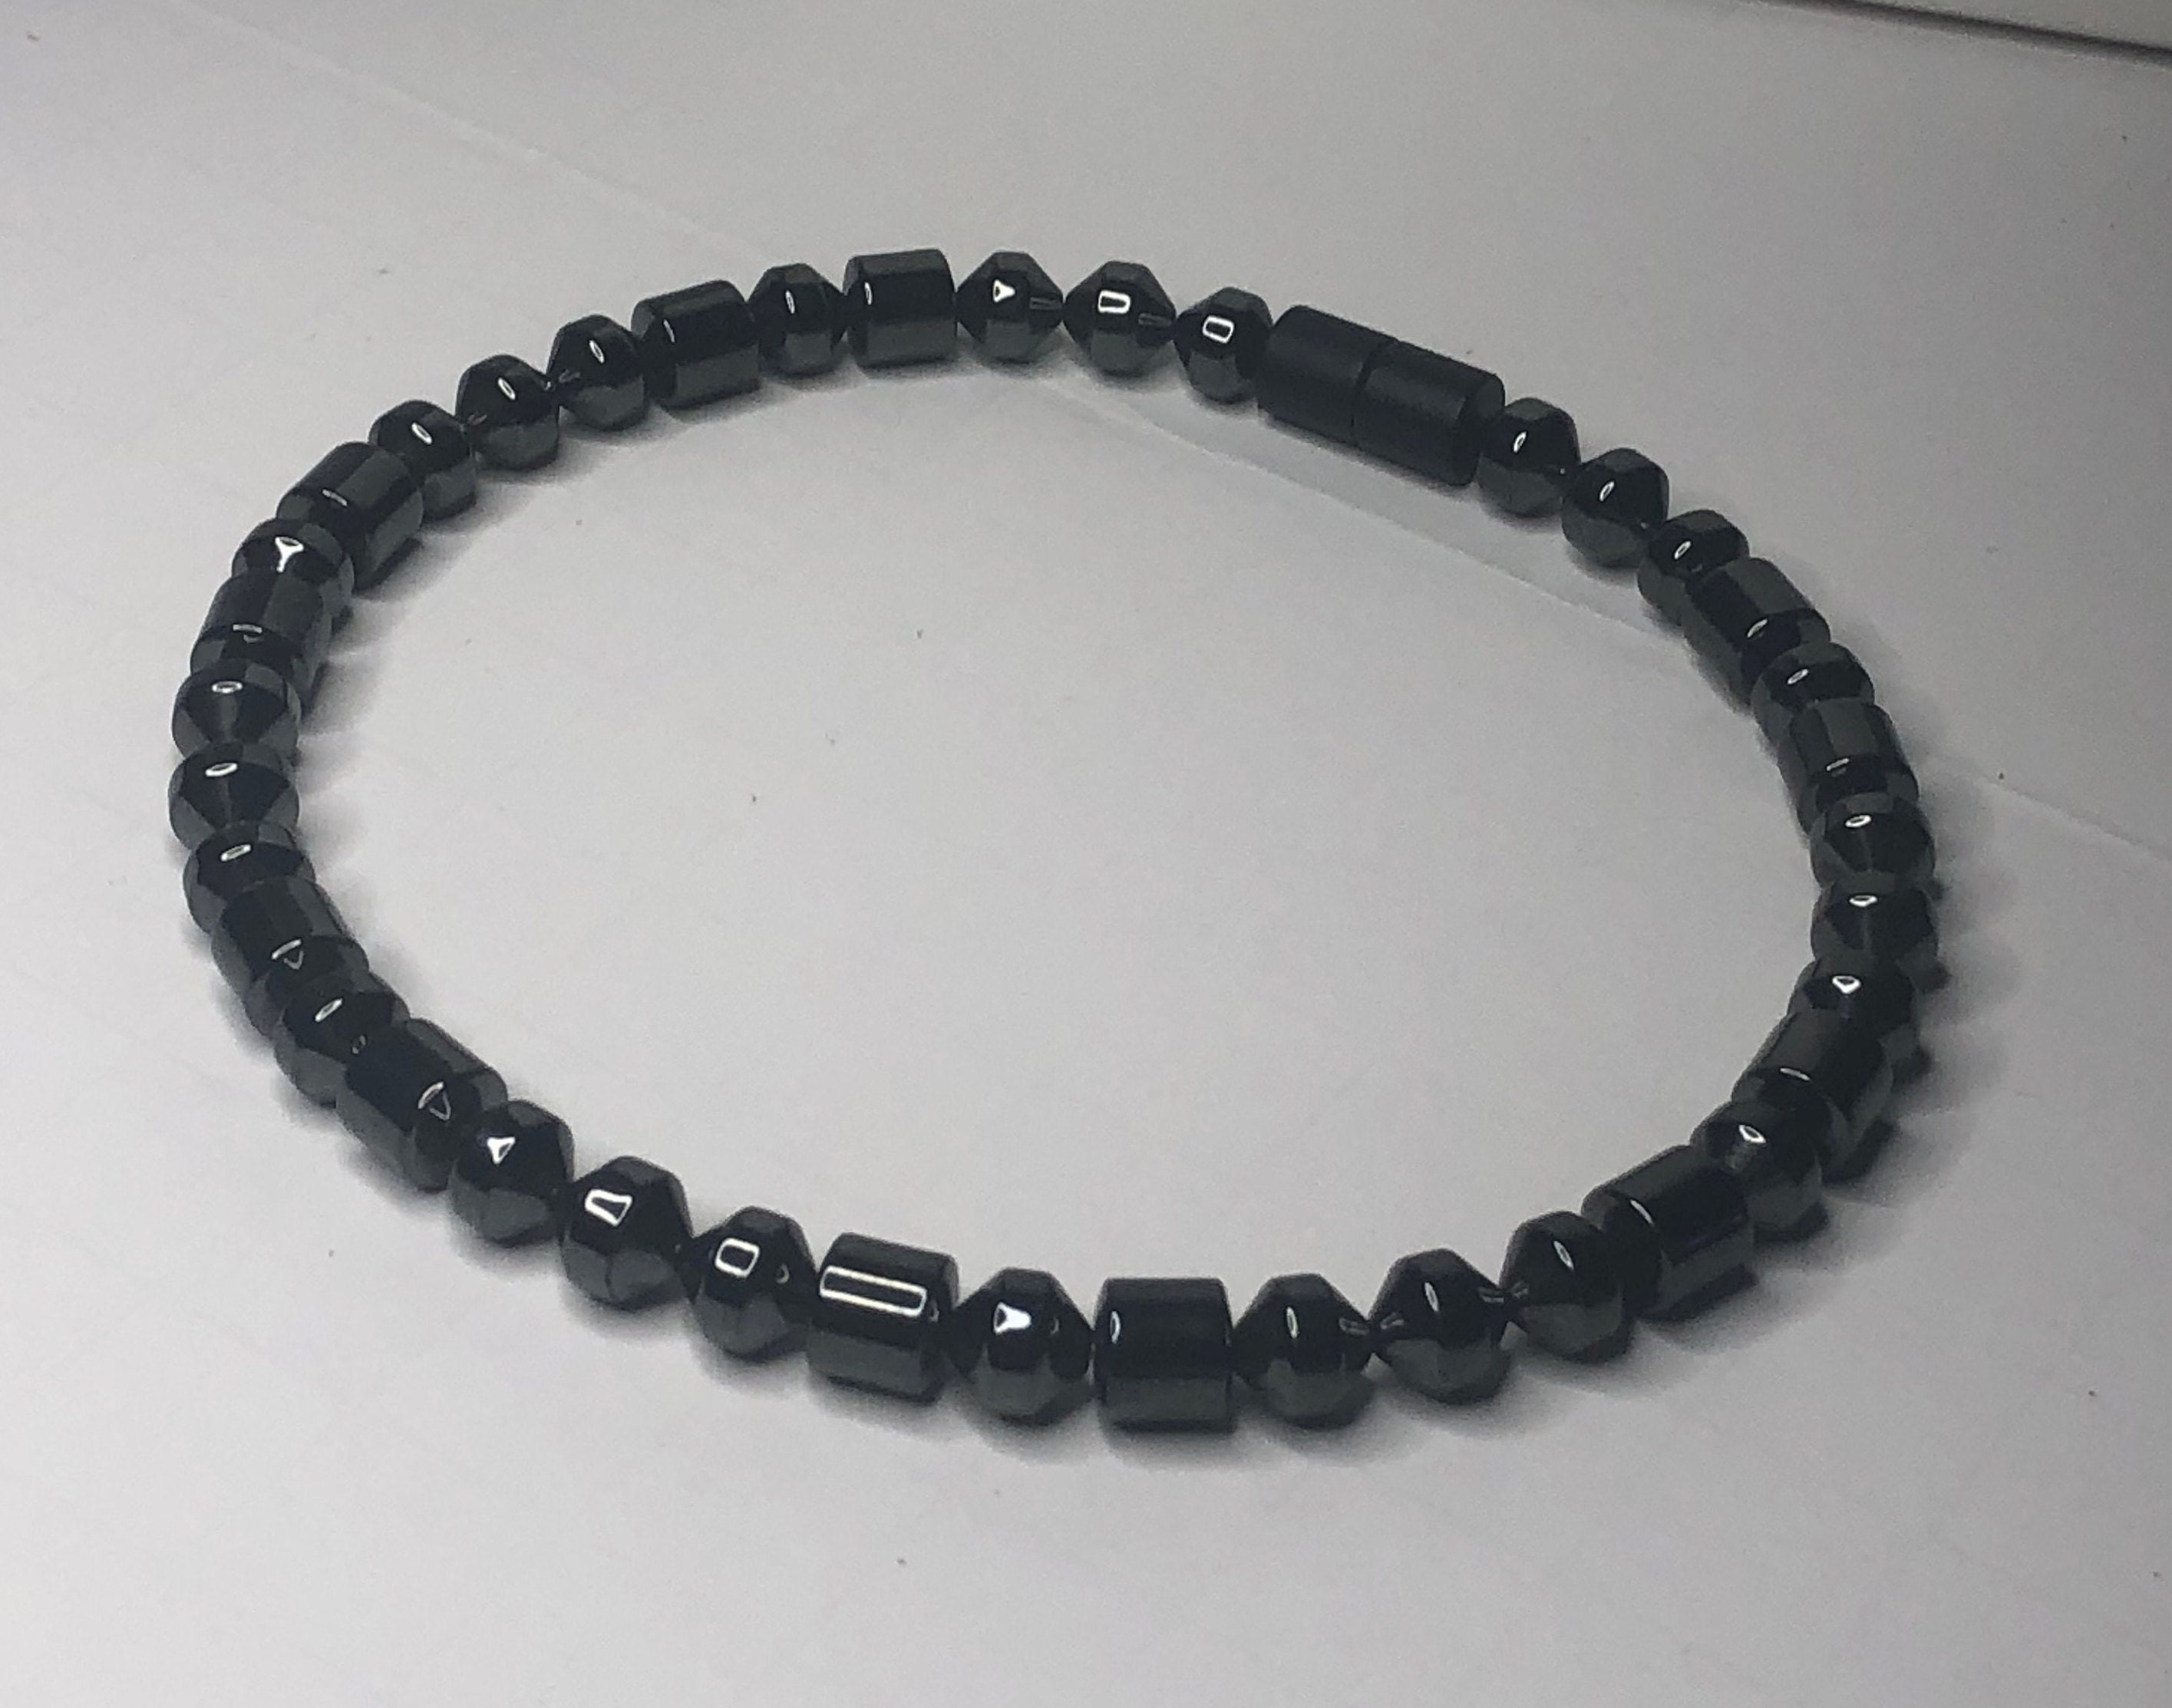 Tool to help you attaching your flexible bracelets